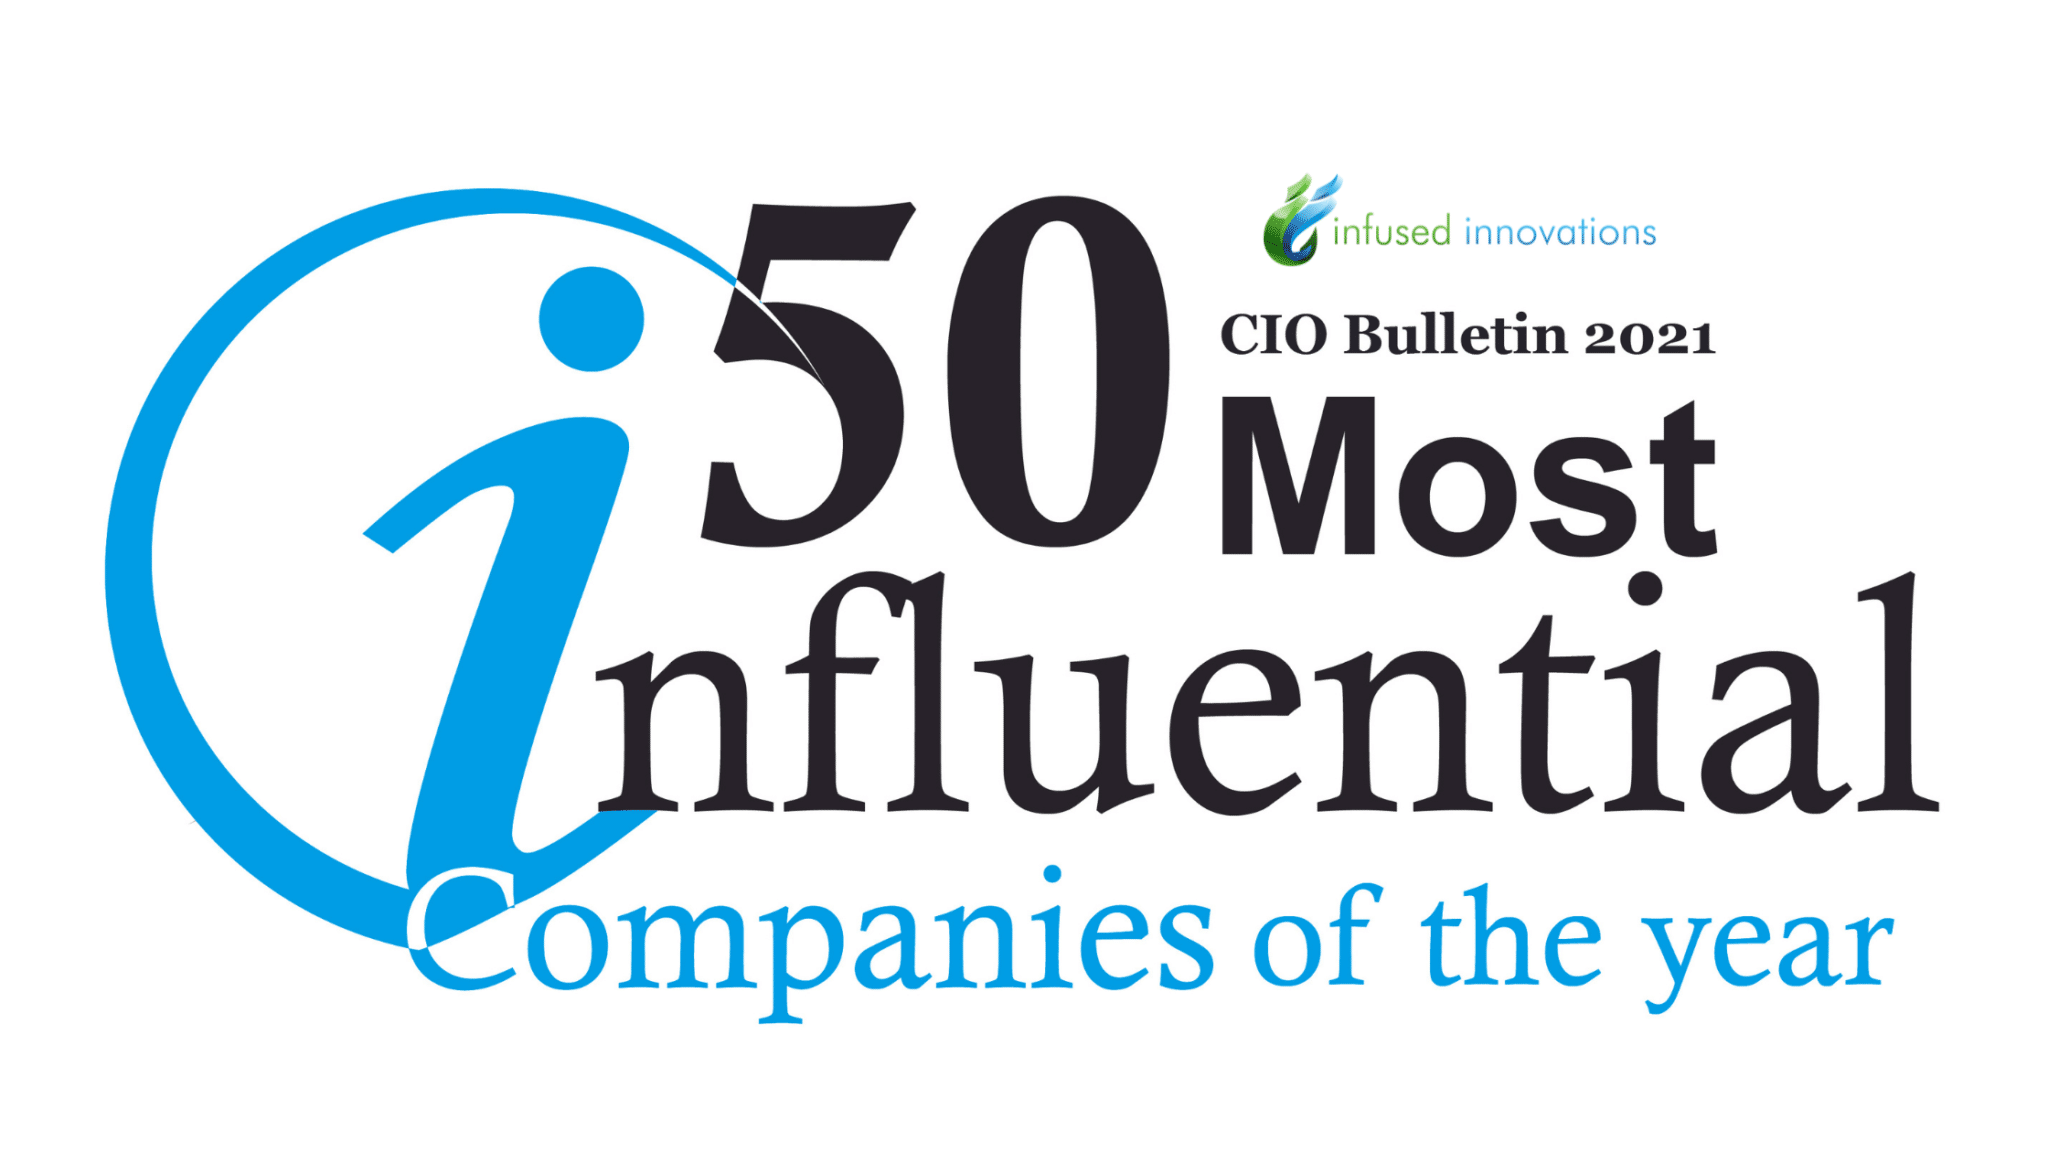 CIO Bulletin Recognizes Infused Innovations in Top 50 Most Influential Companies of the Year 2021 6